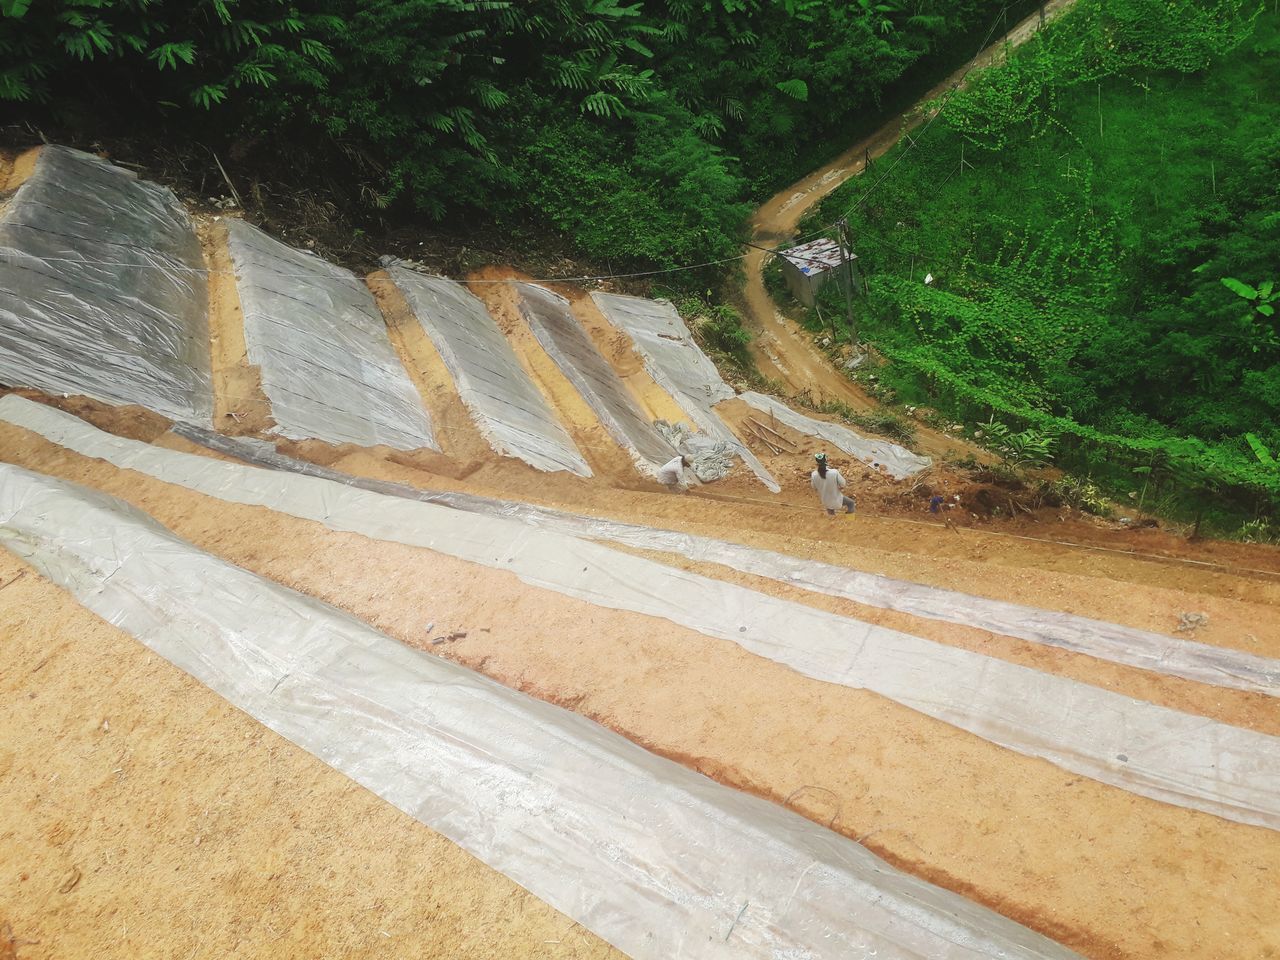 HIGH ANGLE VIEW OF A HORSE IN THE GROUND